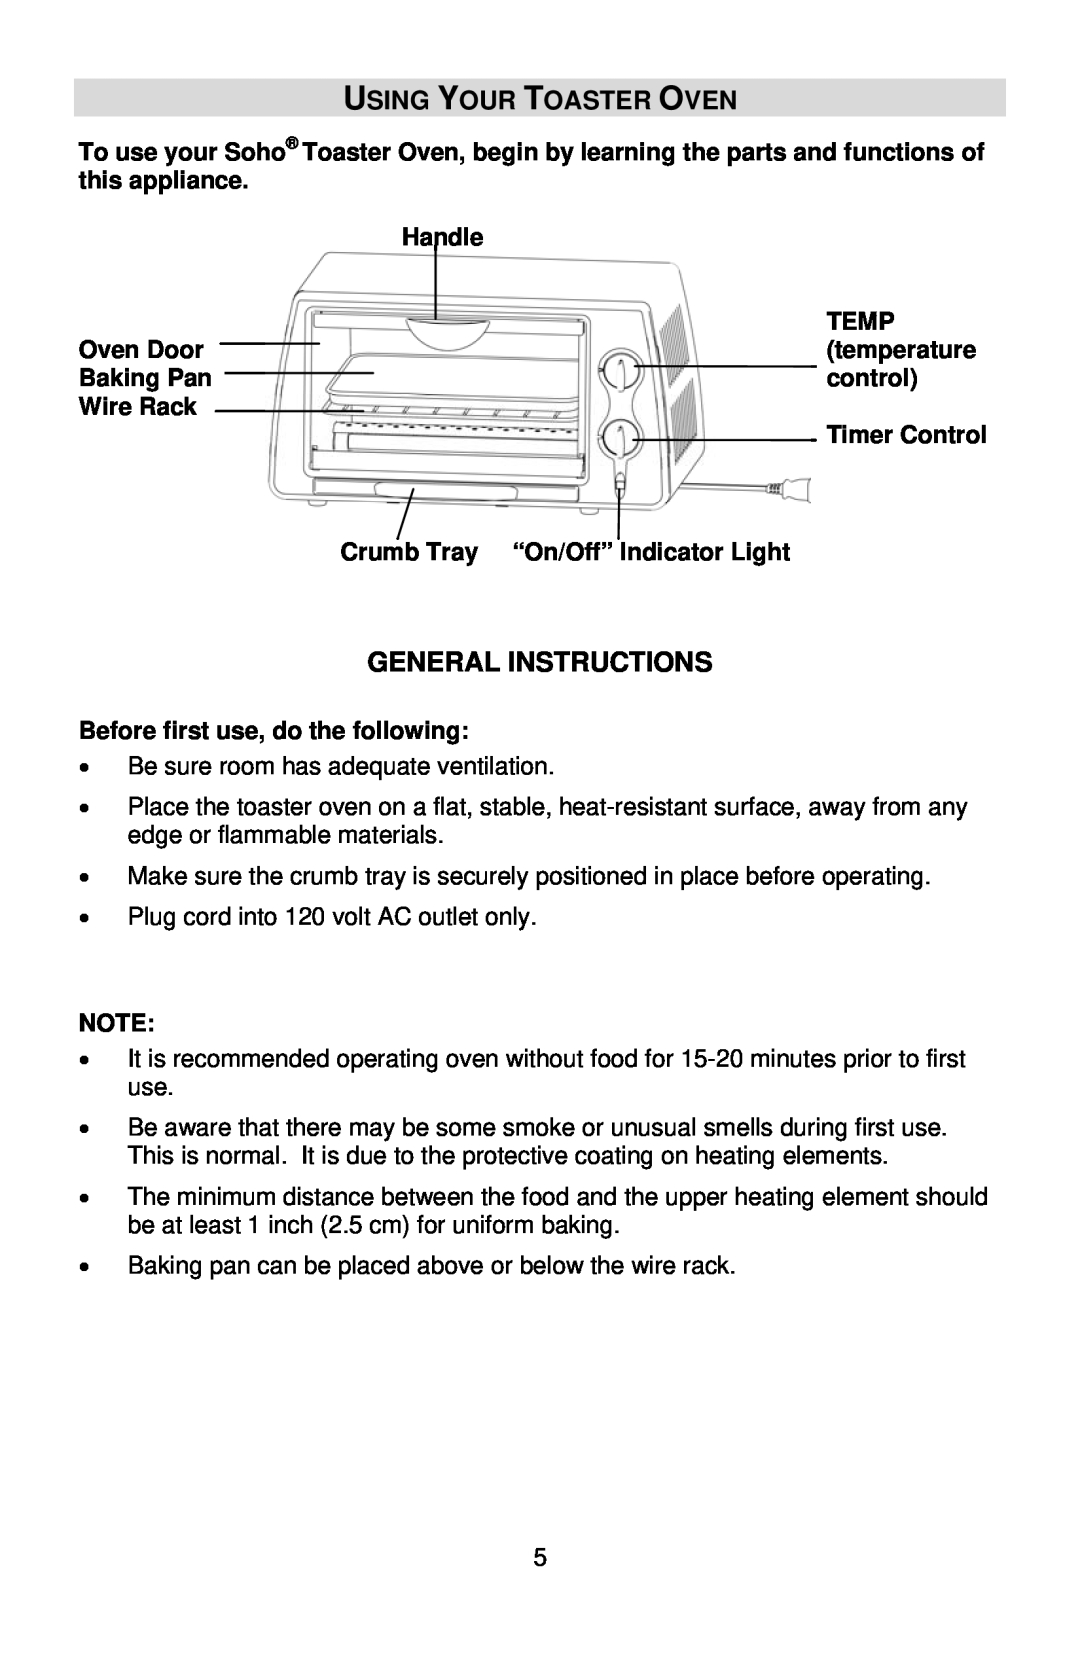 West Bend L5704, SHTO100 instruction manual Using Your Toaster Oven, General Instructions 